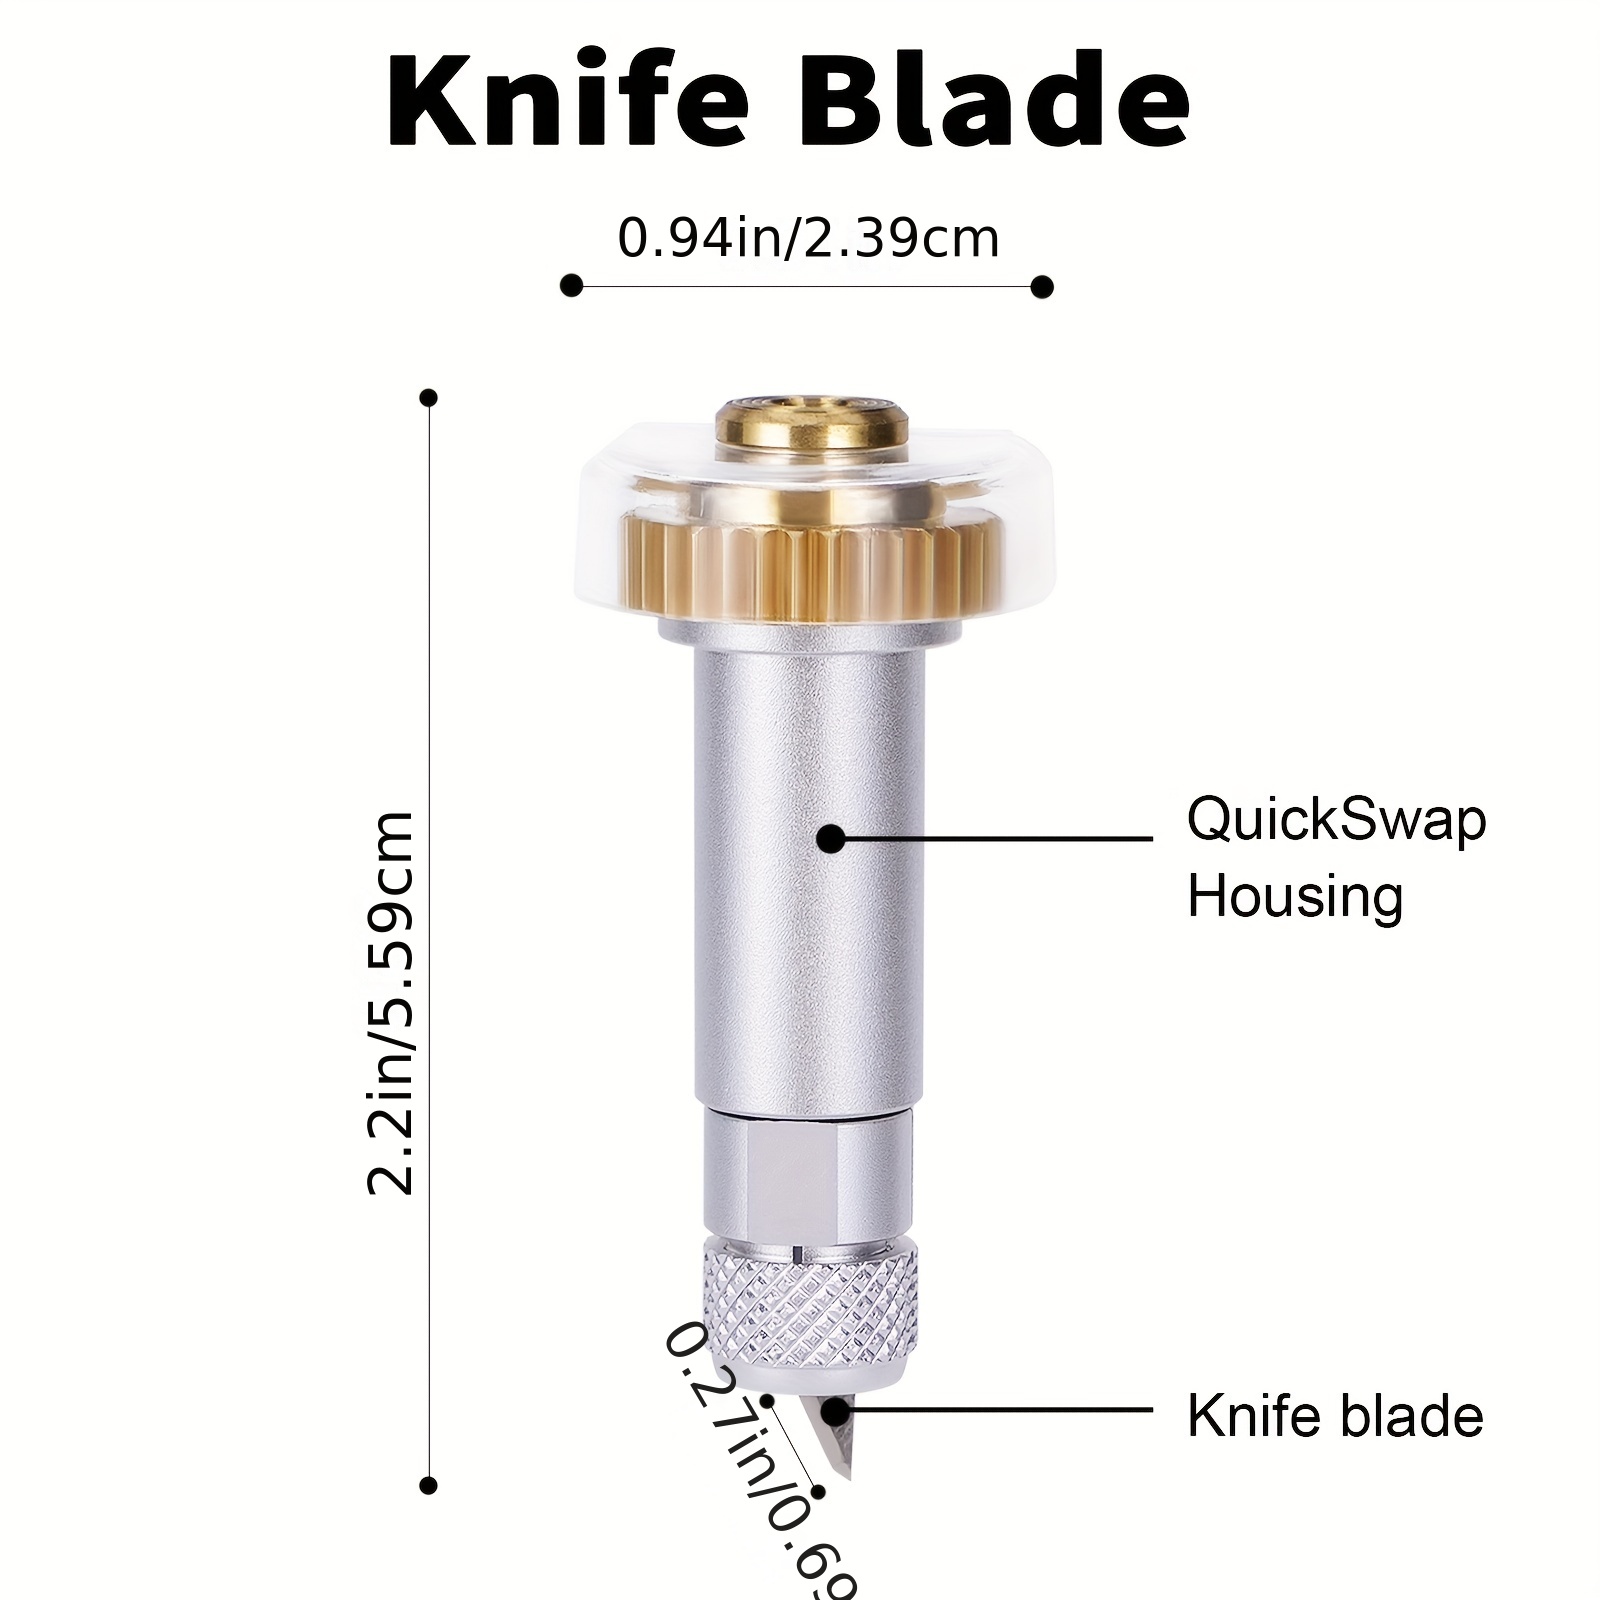 1pc Knife Blade And Drive Housing For Cricut Maker, Cutting Blade Cuts  Wood, Leather, Chipboard More, Create Puzzles, Models, Leather Goods And  More